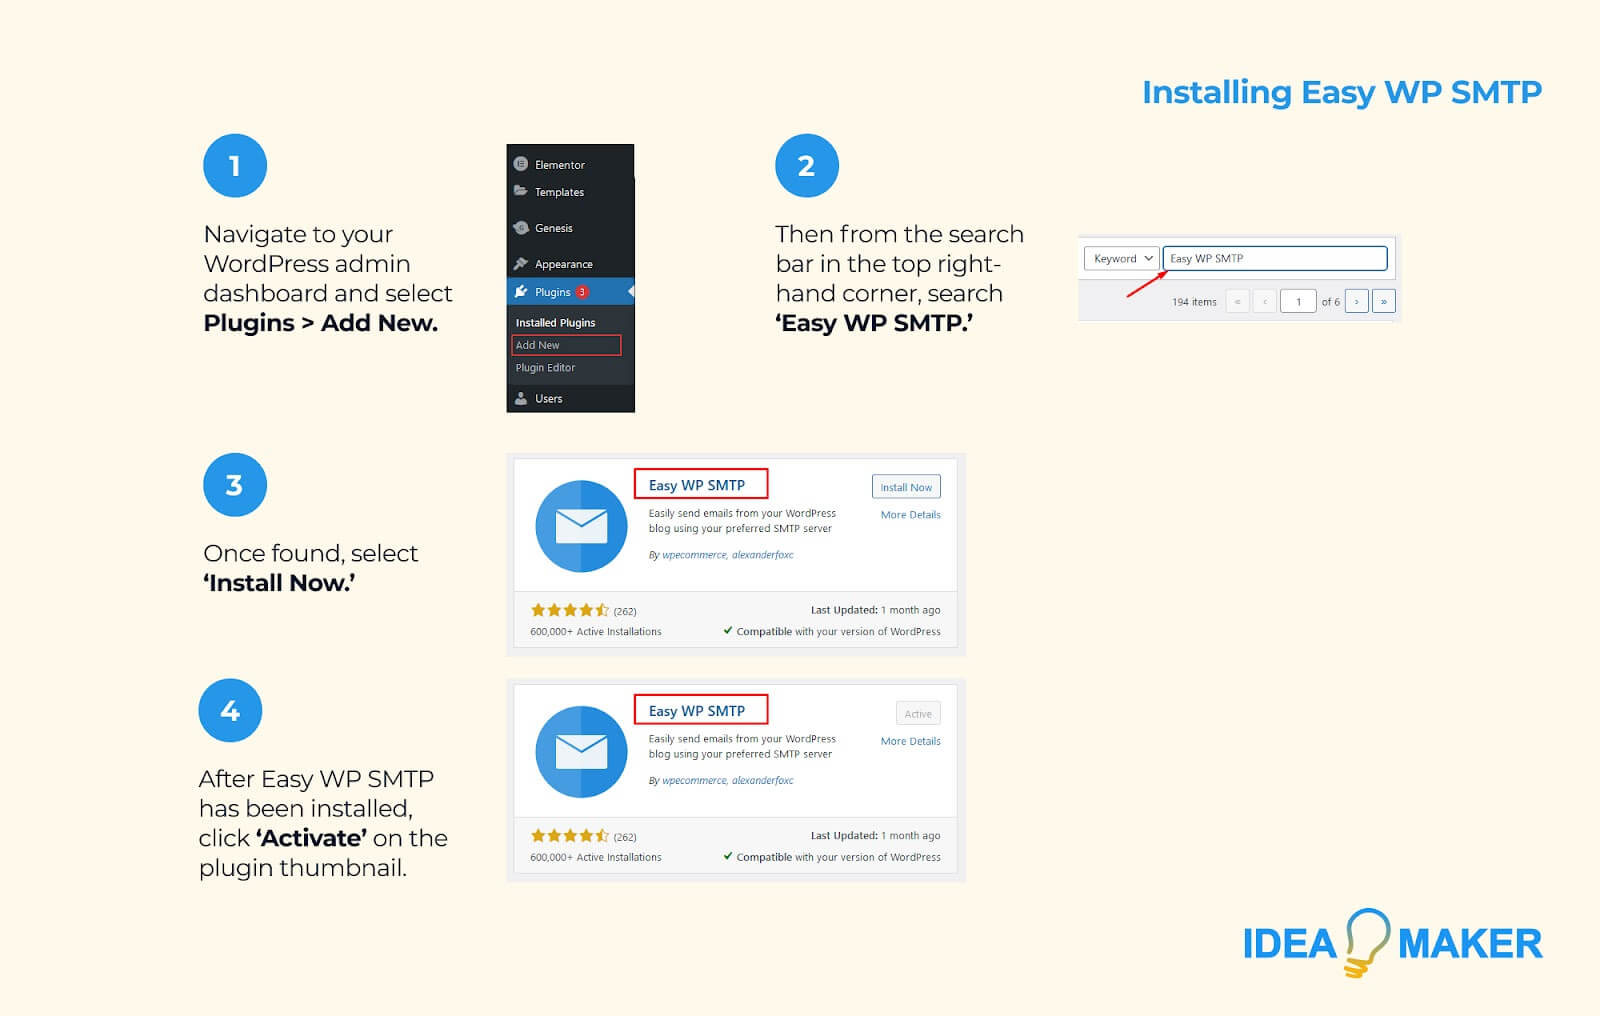 Graphic guide showing how to instal Easy WP SMTP